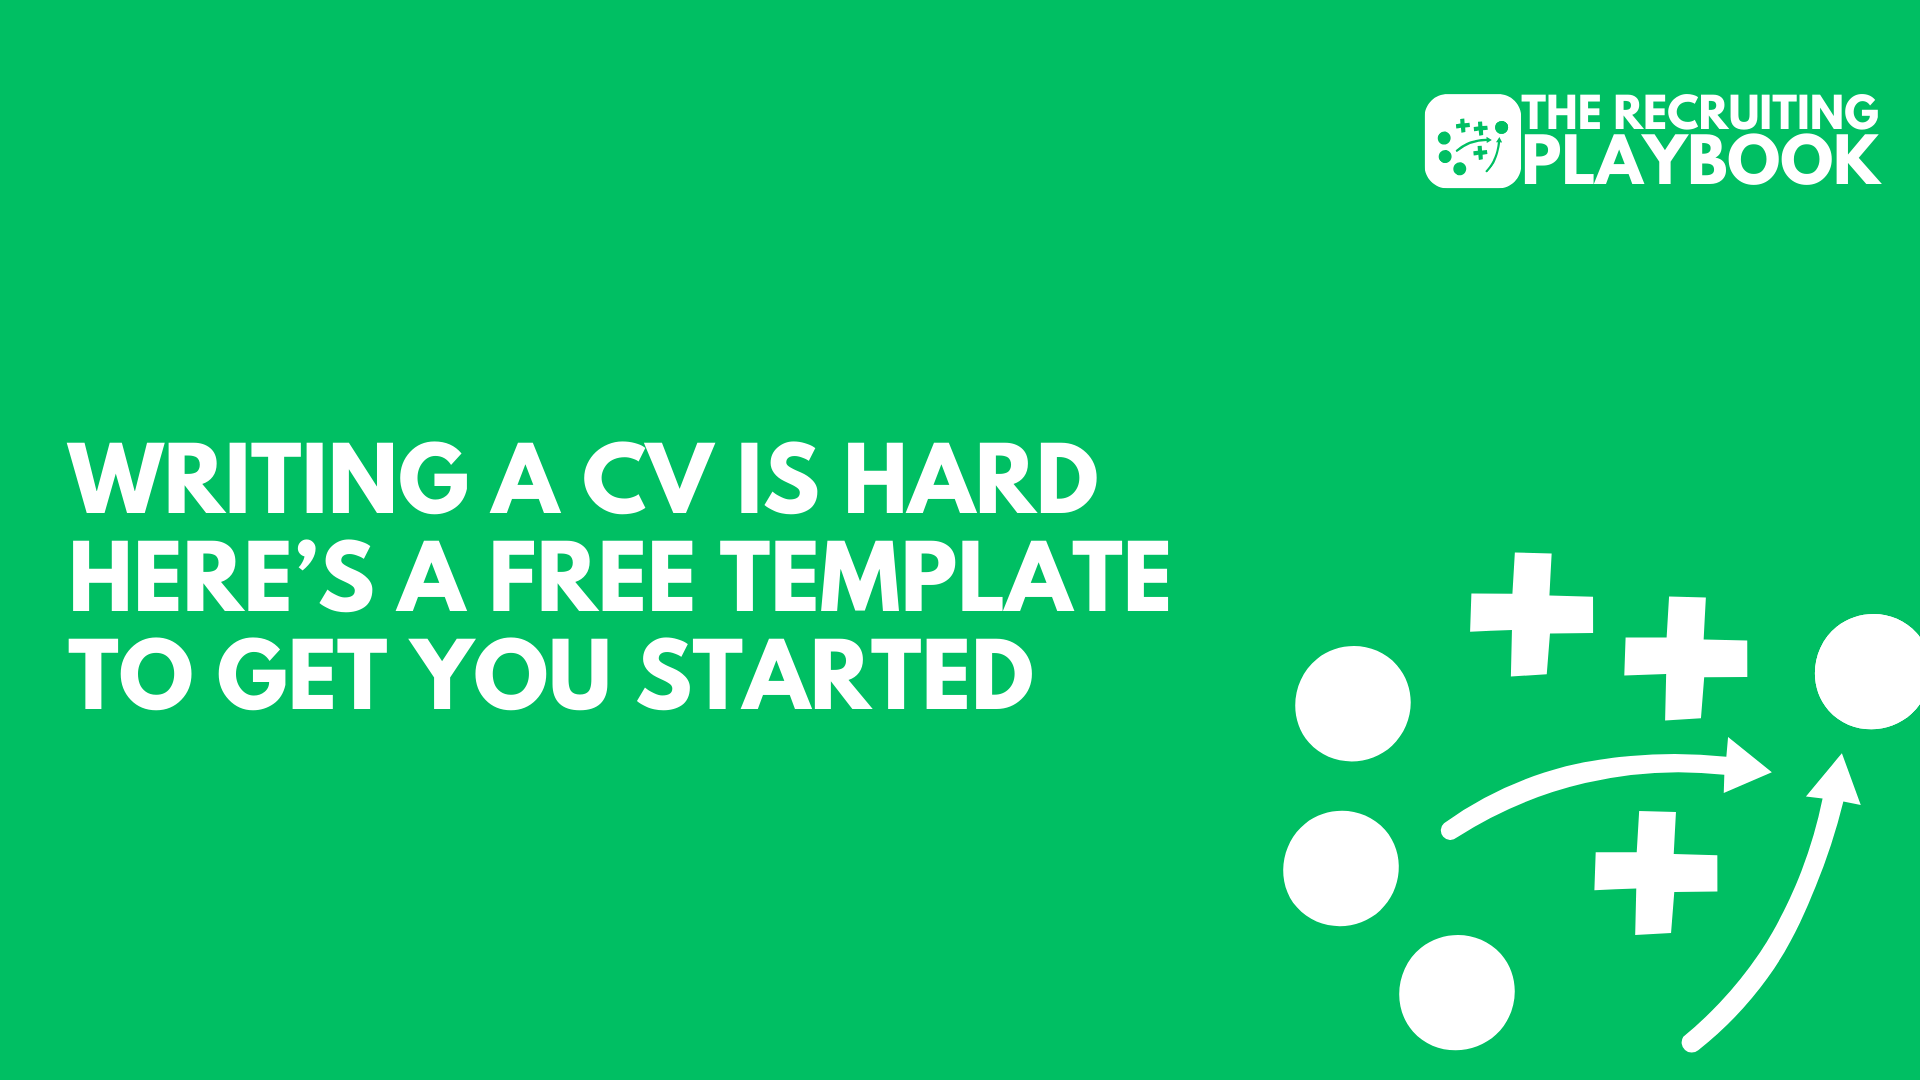 Writing A CV Is Hard: Here's a free CV Template To Get You Started